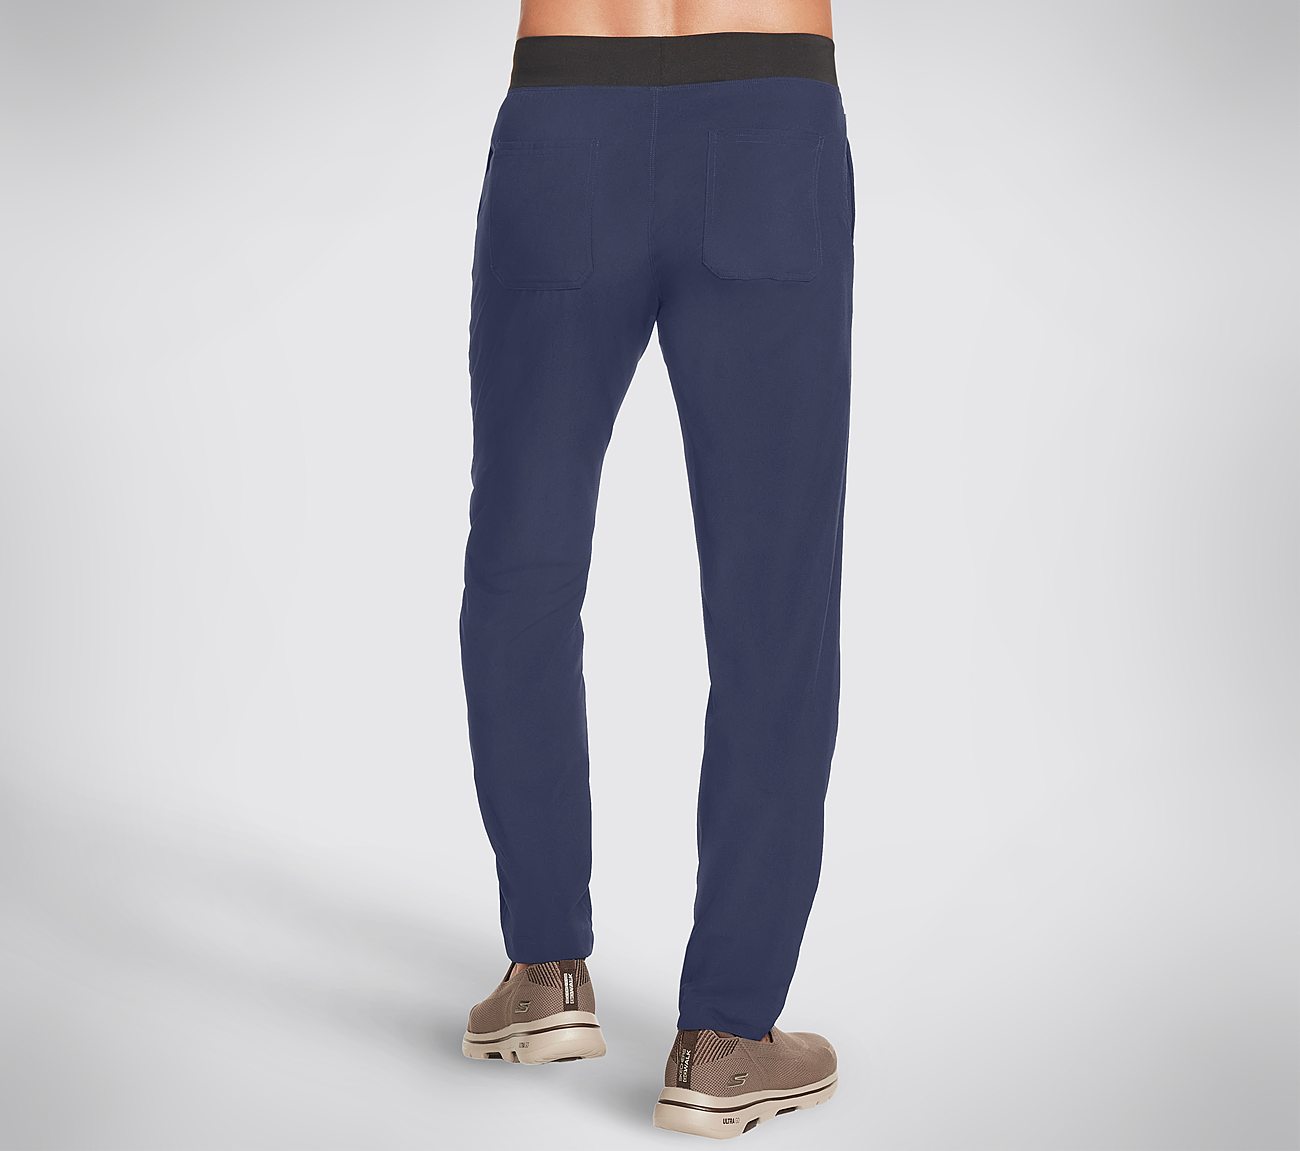 GO WALK ACTION PANT, NNNAVY Apparels Top View